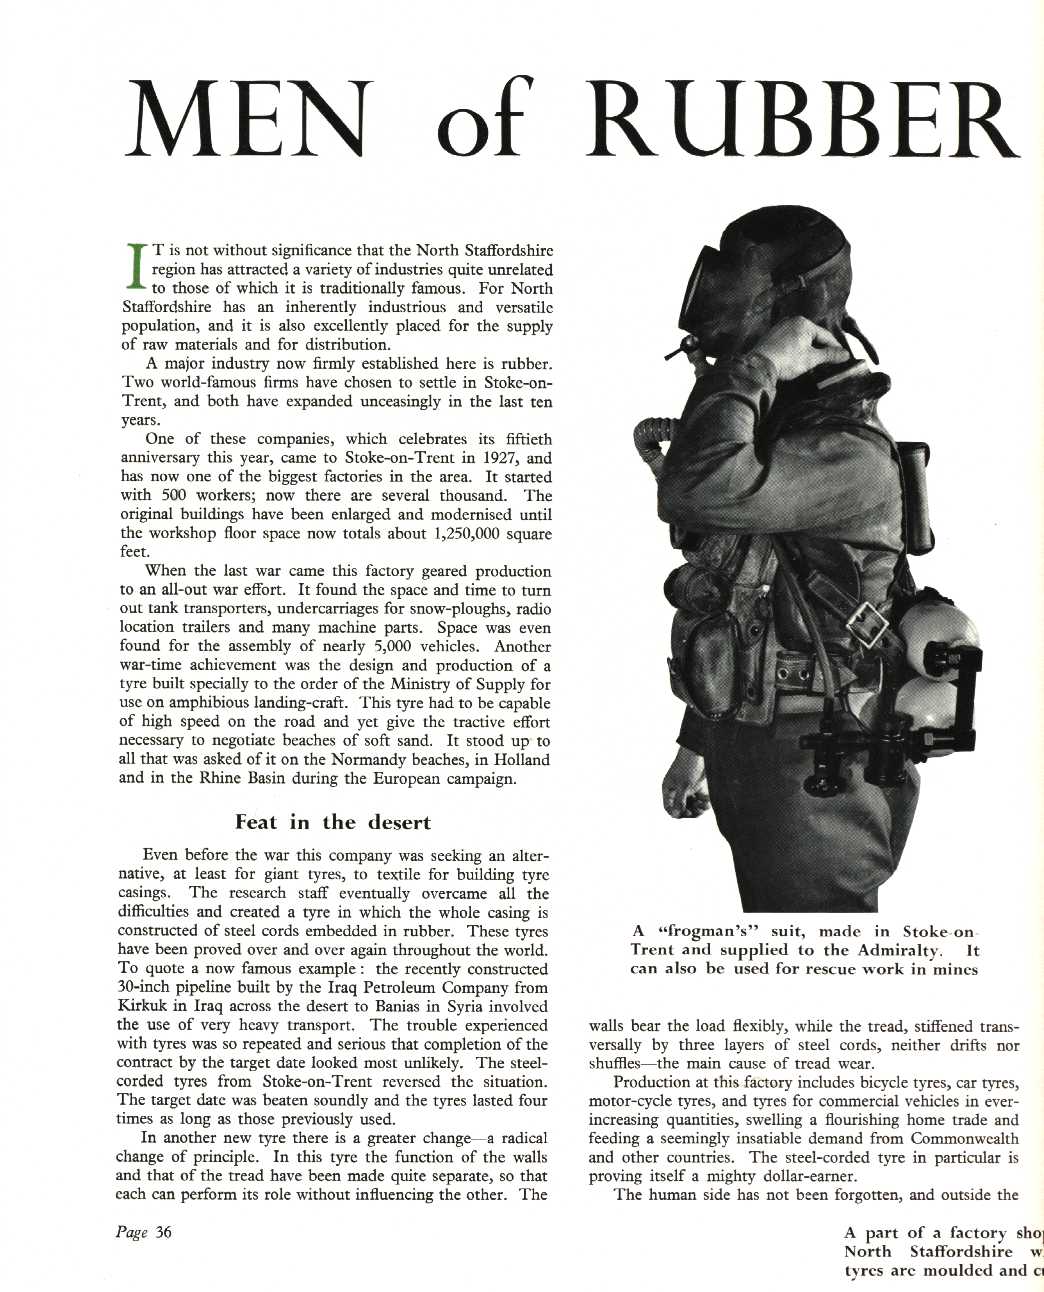 Men of Rubber" article on two 'rubber' companies - neither are named (but one is Michelin) 